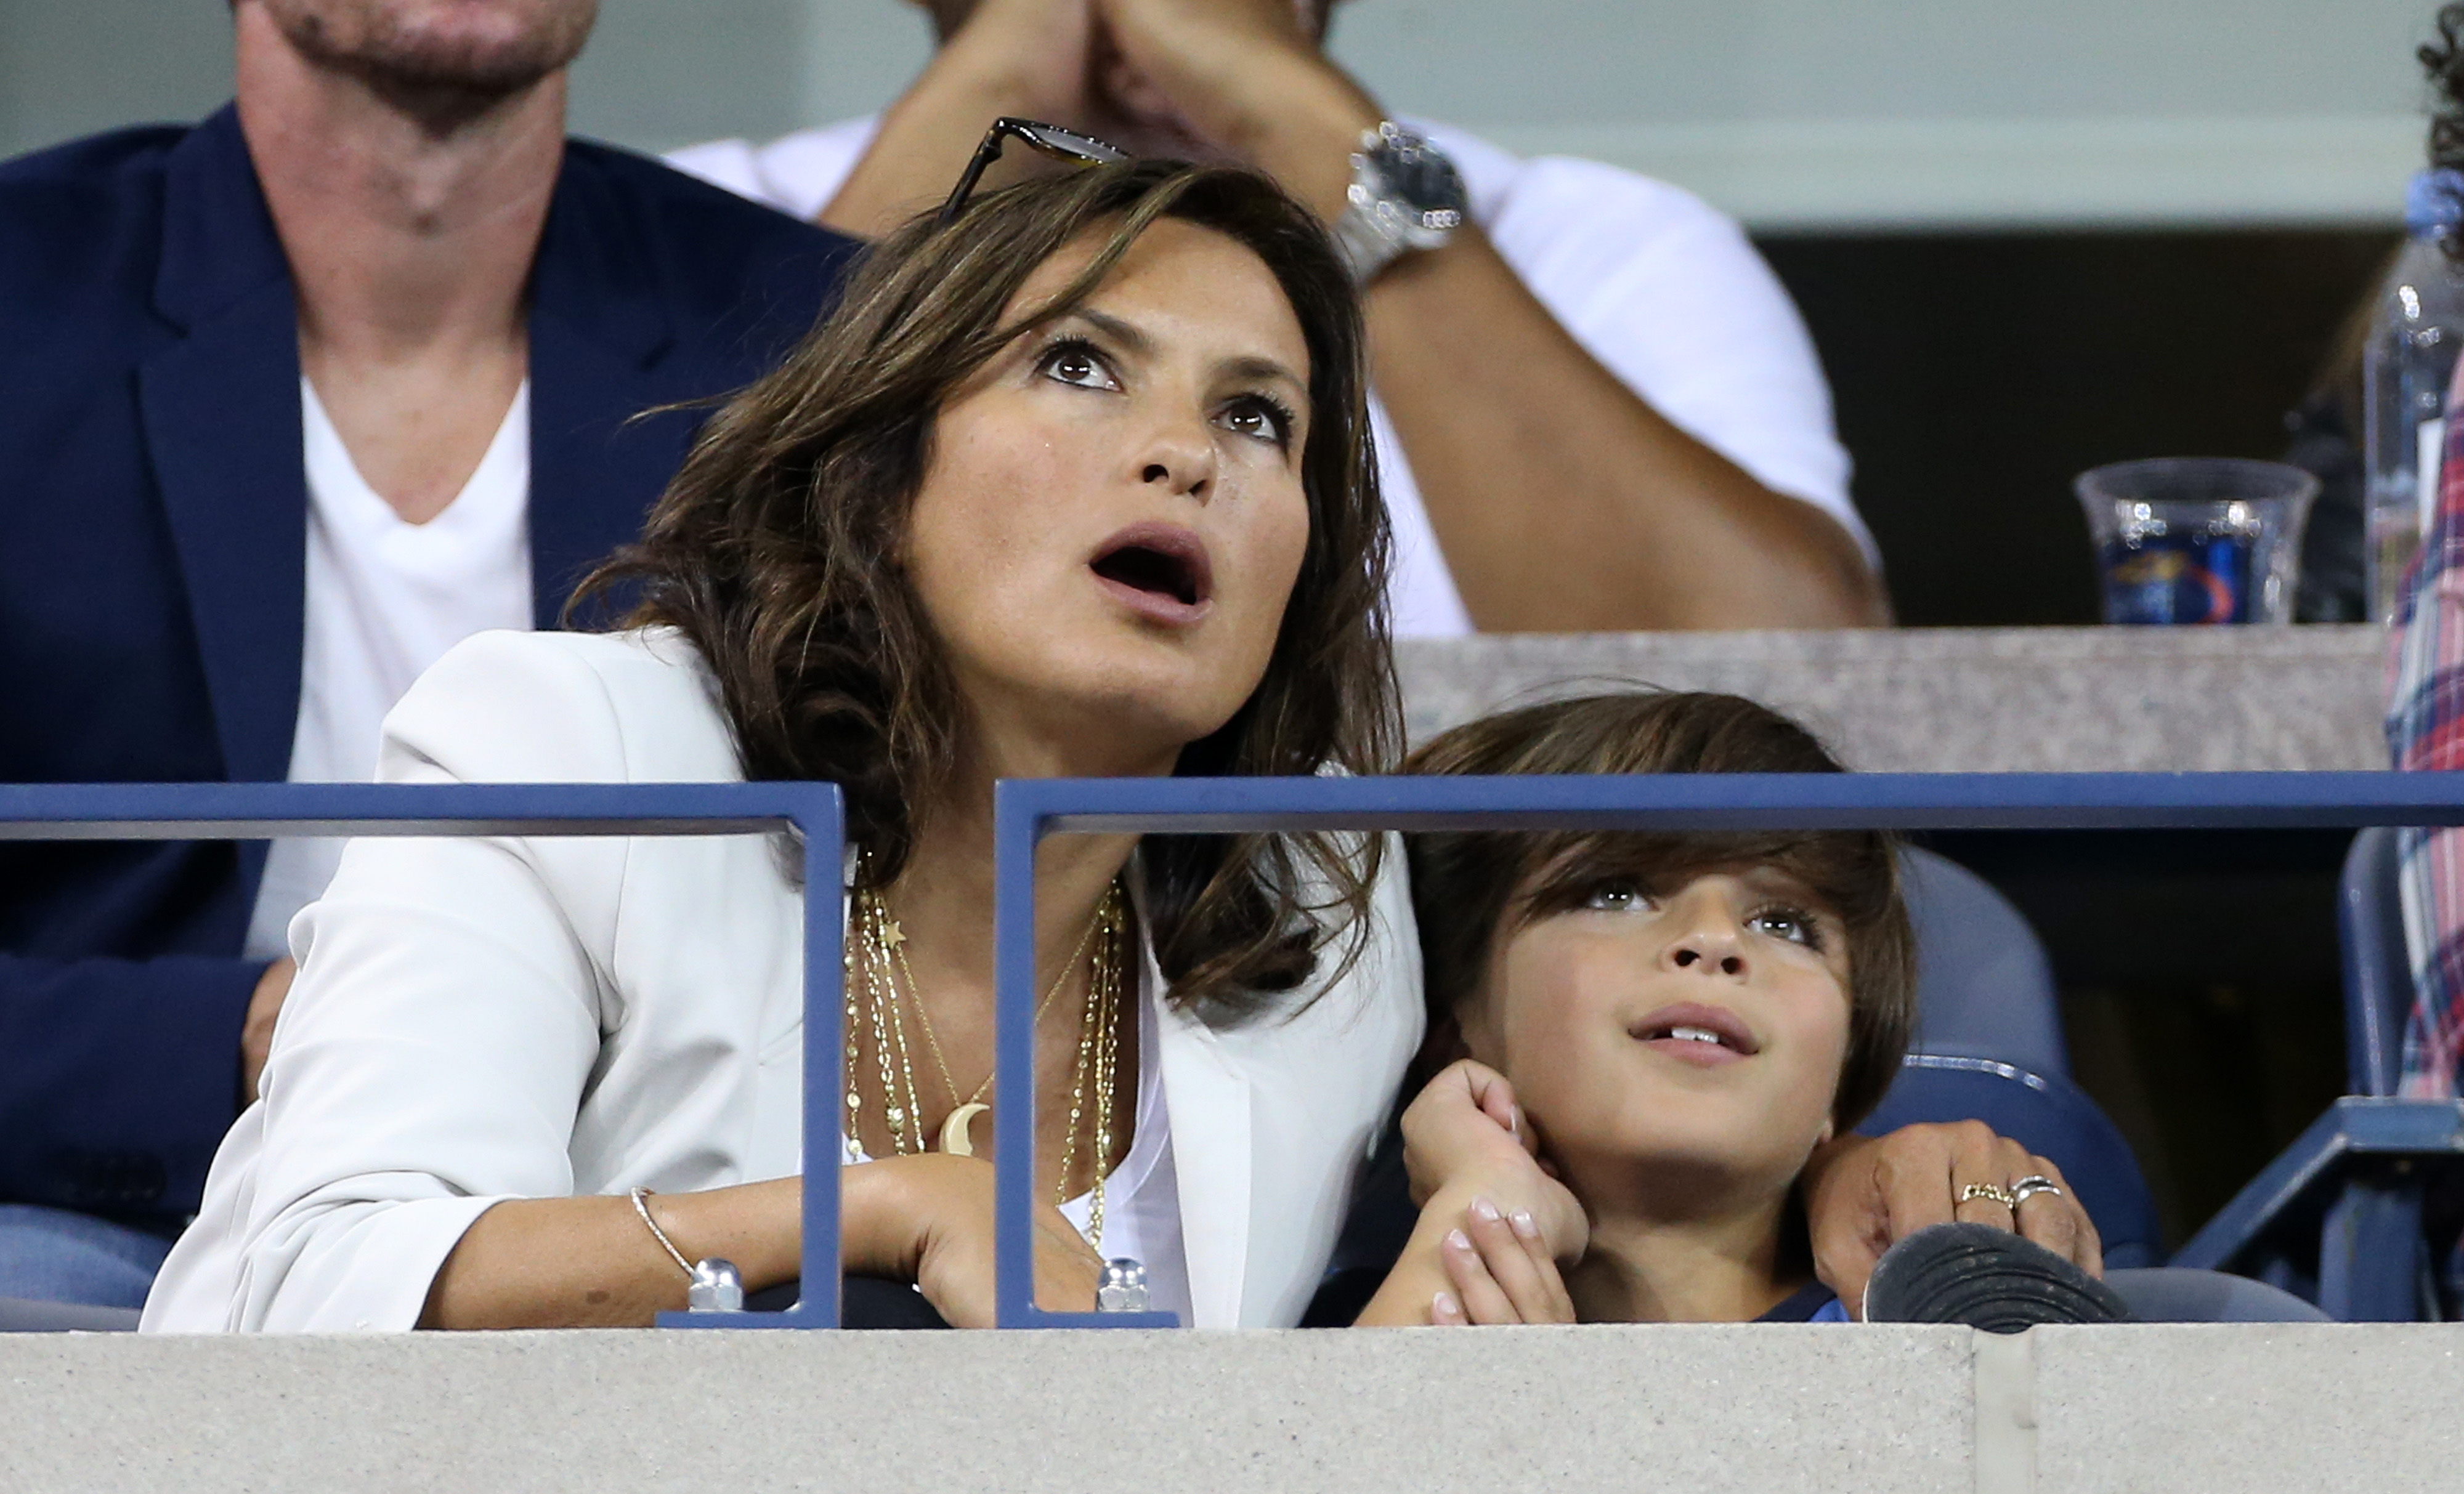 Mariska Hargitay and her eldest son spotted at the US open in New York City on August 26, 2014 | Source: Getty Images